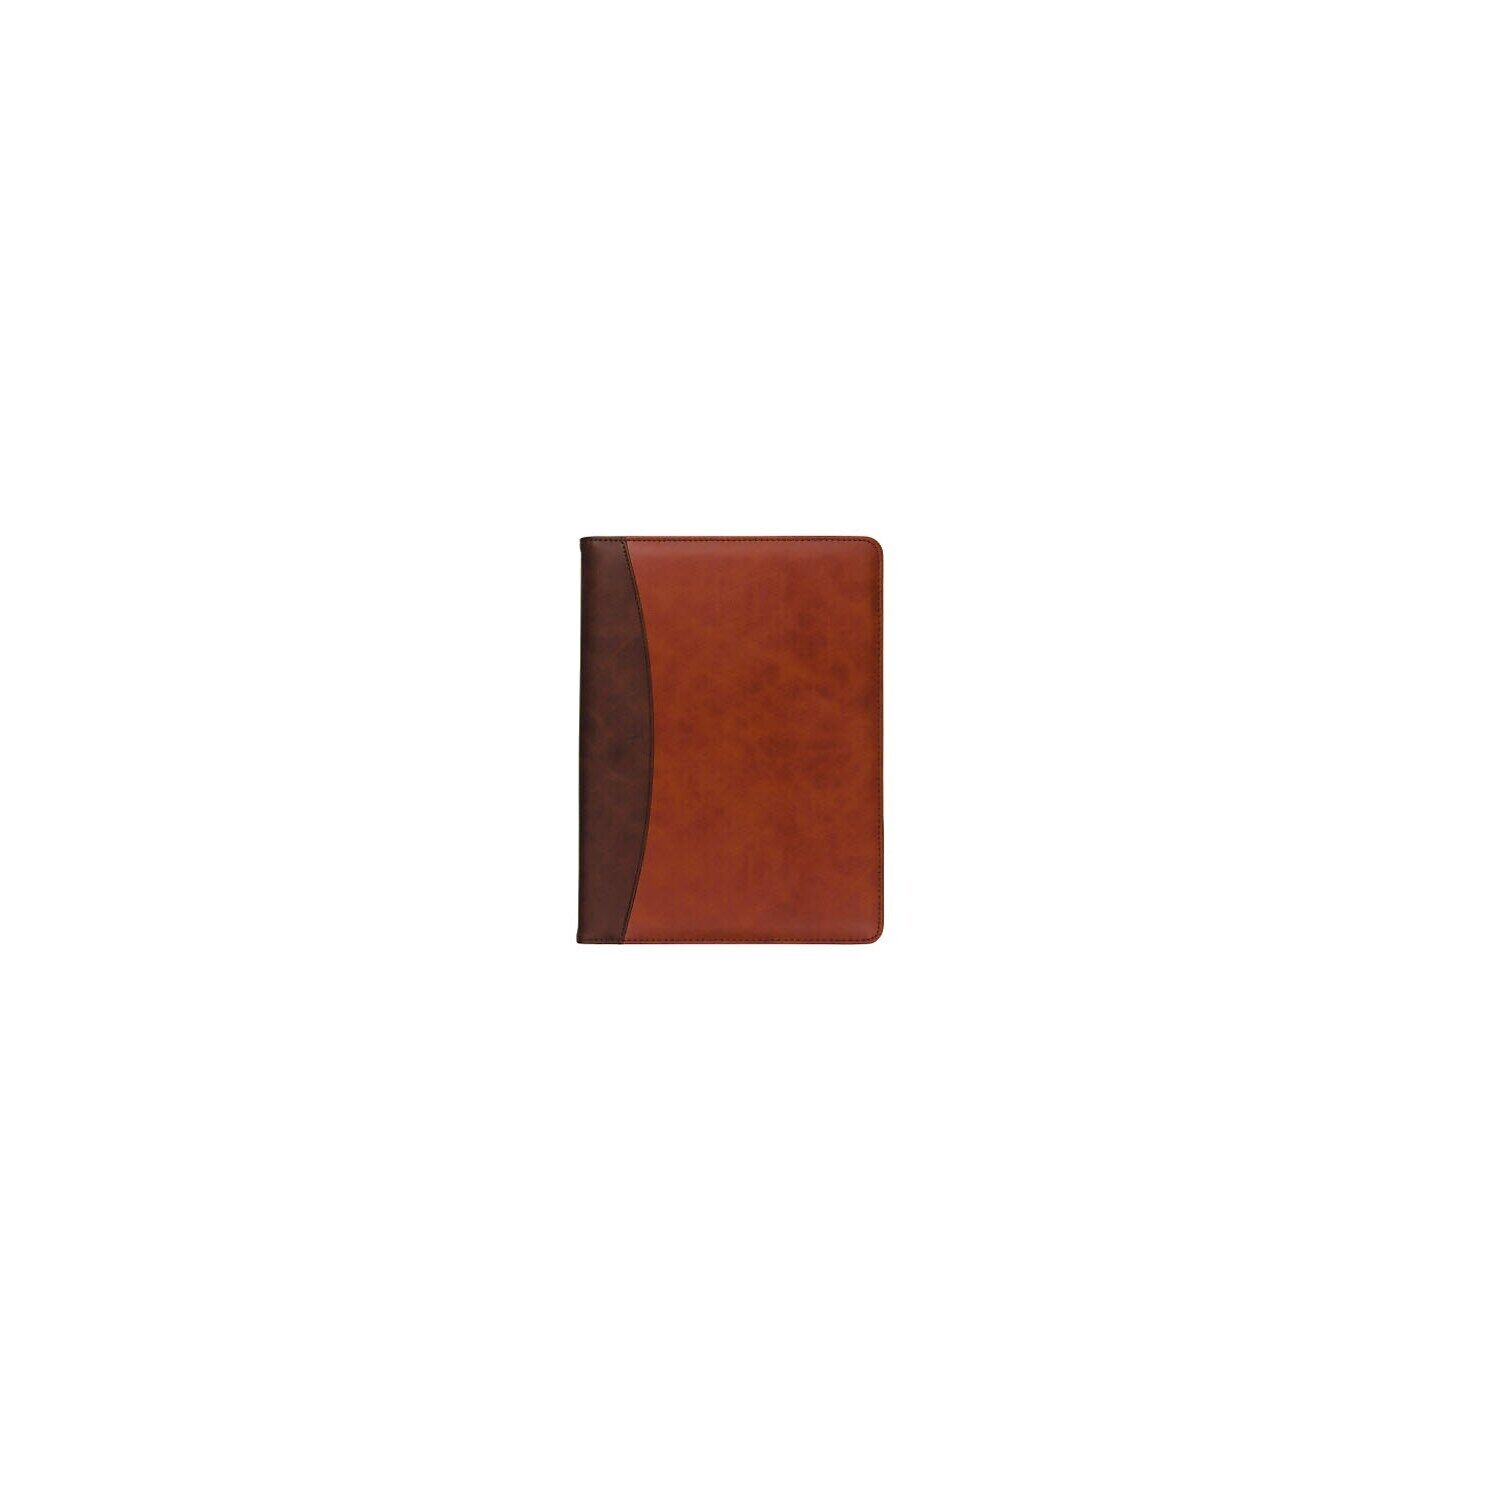 Samsill Faux Leather Padfolio/Notepad Tan/Brown (71656)